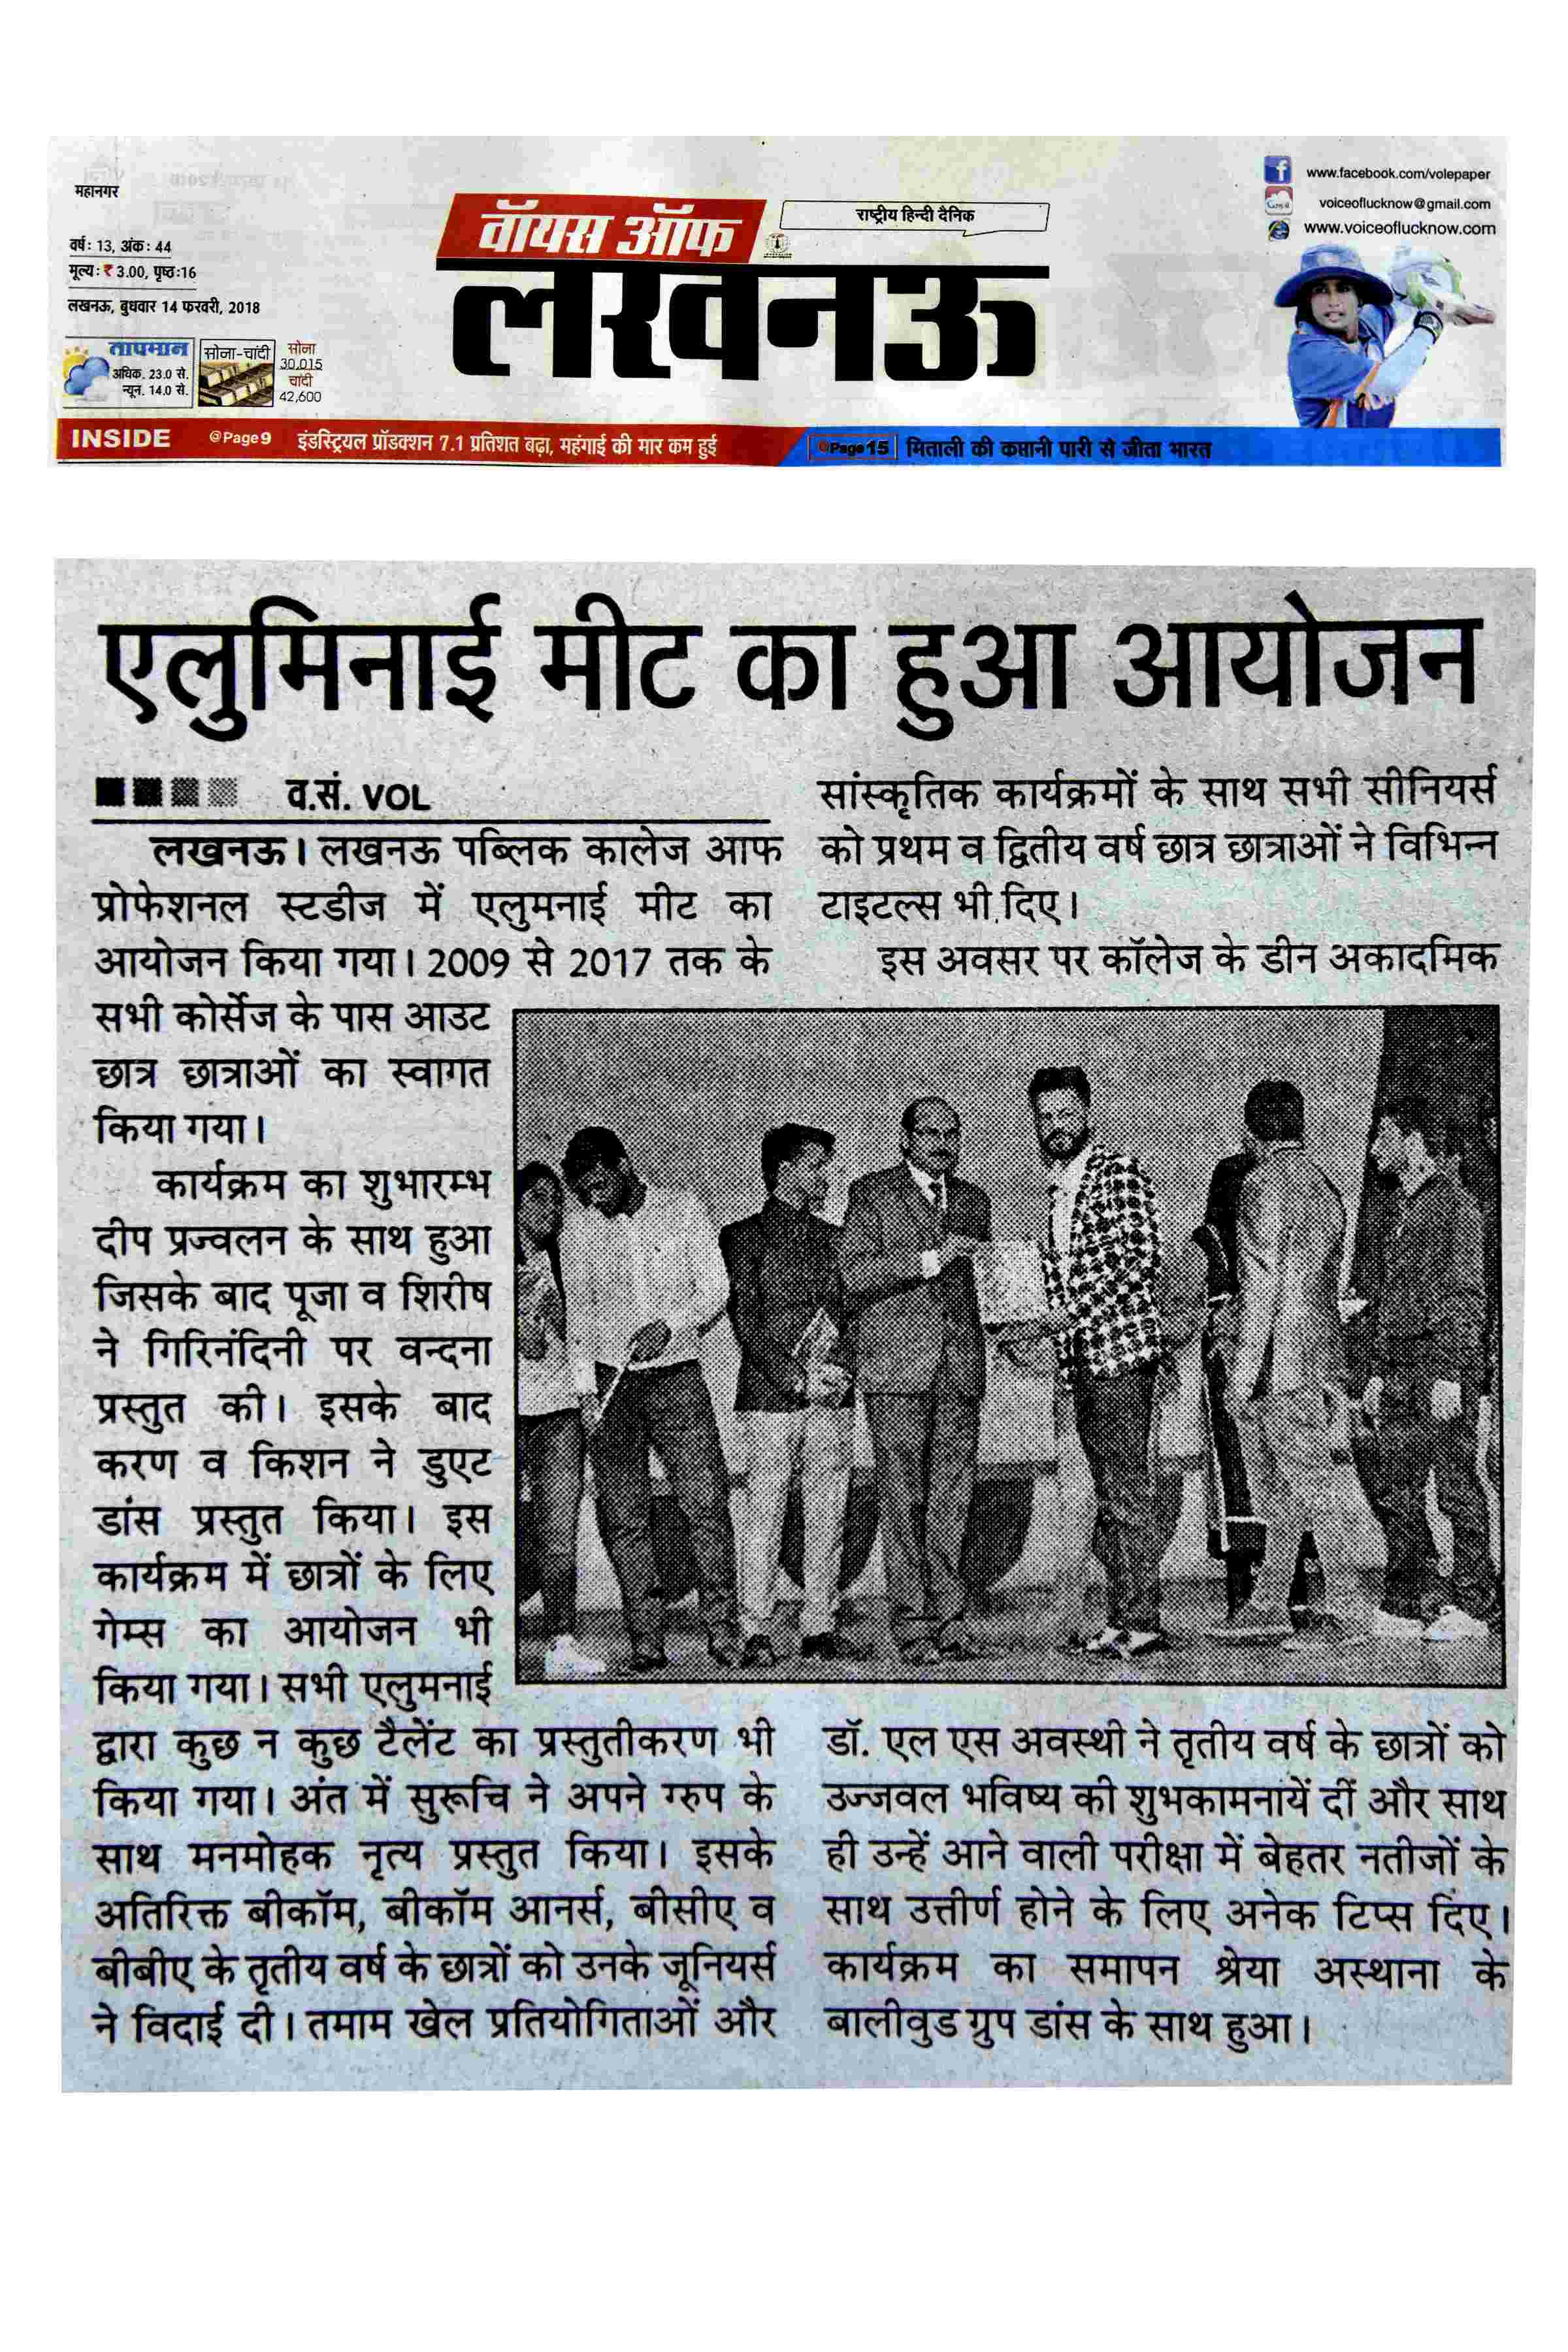 LPCPS ALUMNAI MEET 14th FEBRUARY 2018-VOICE OF LUCKNOW PAGE 4